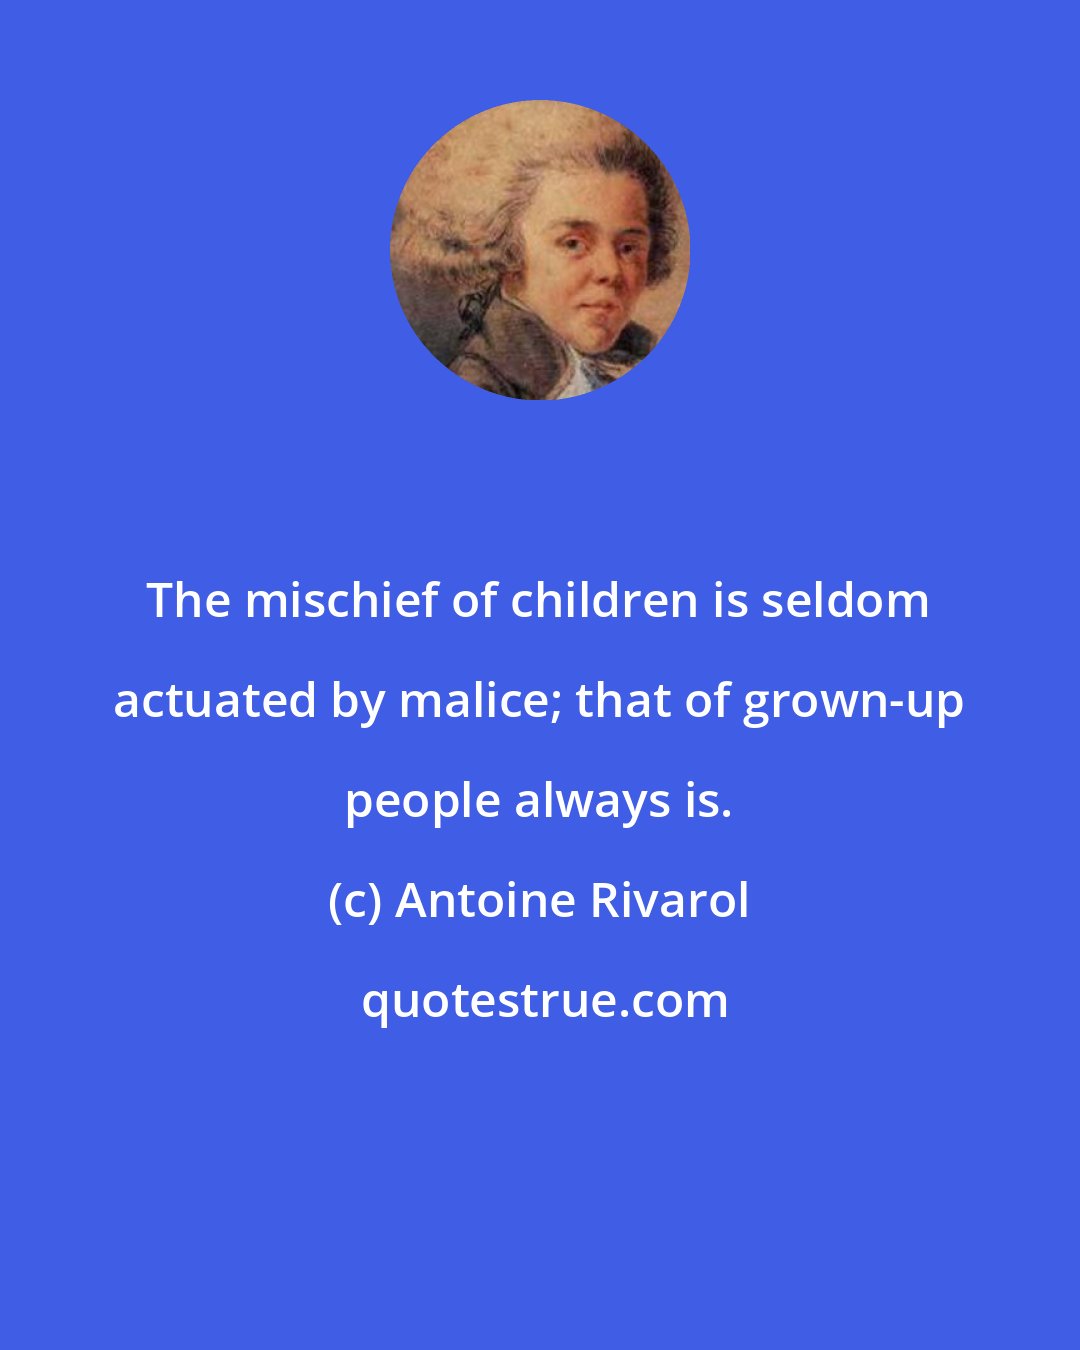 Antoine Rivarol: The mischief of children is seldom actuated by malice; that of grown-up people always is.